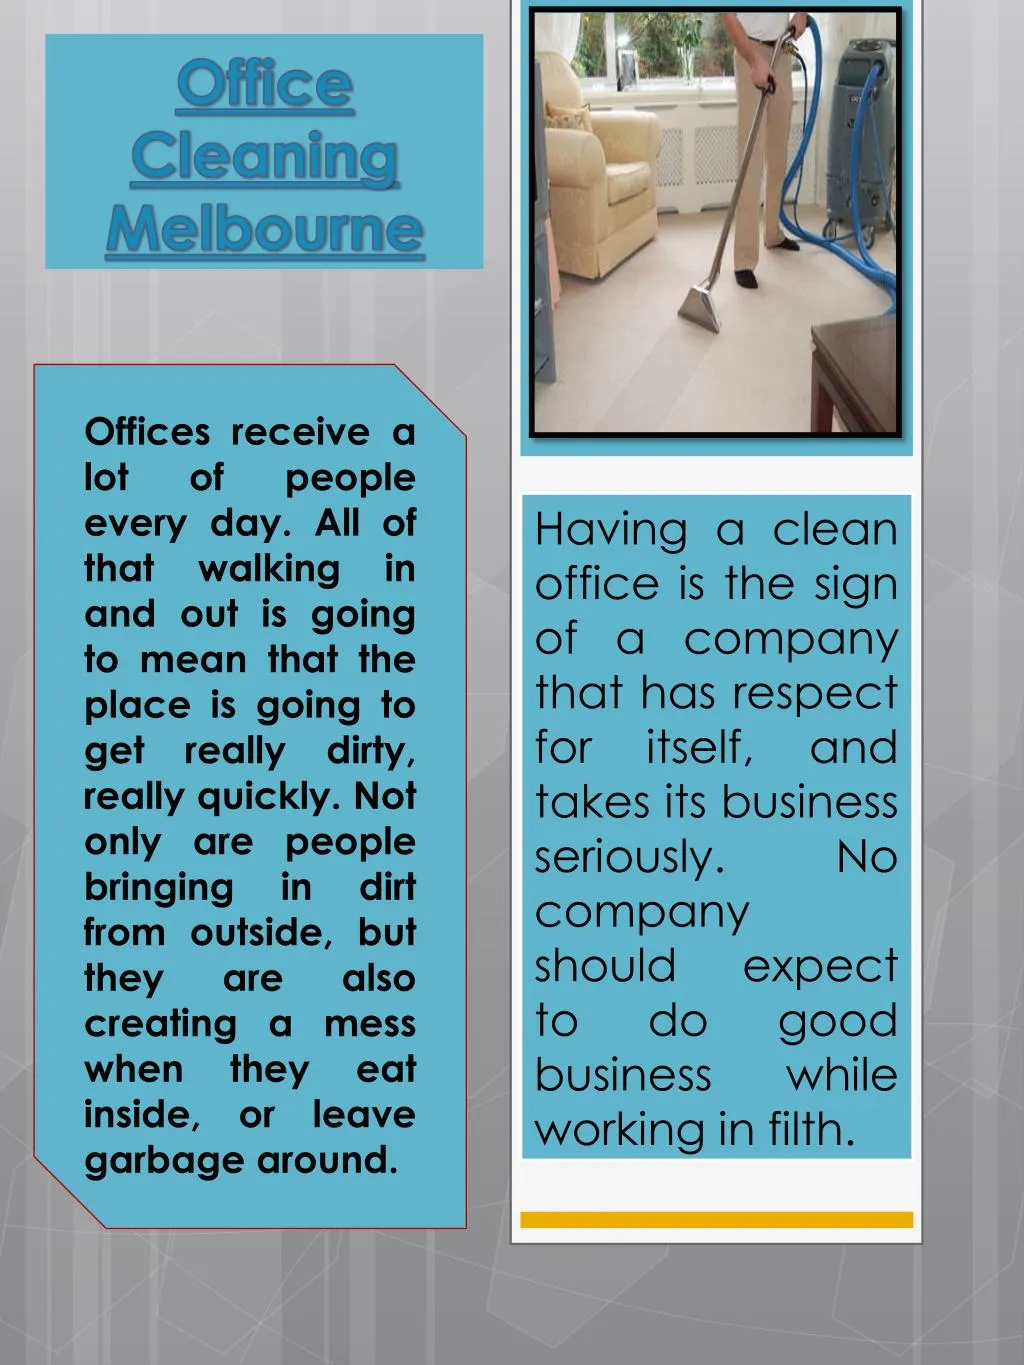 office cleaning melbourne